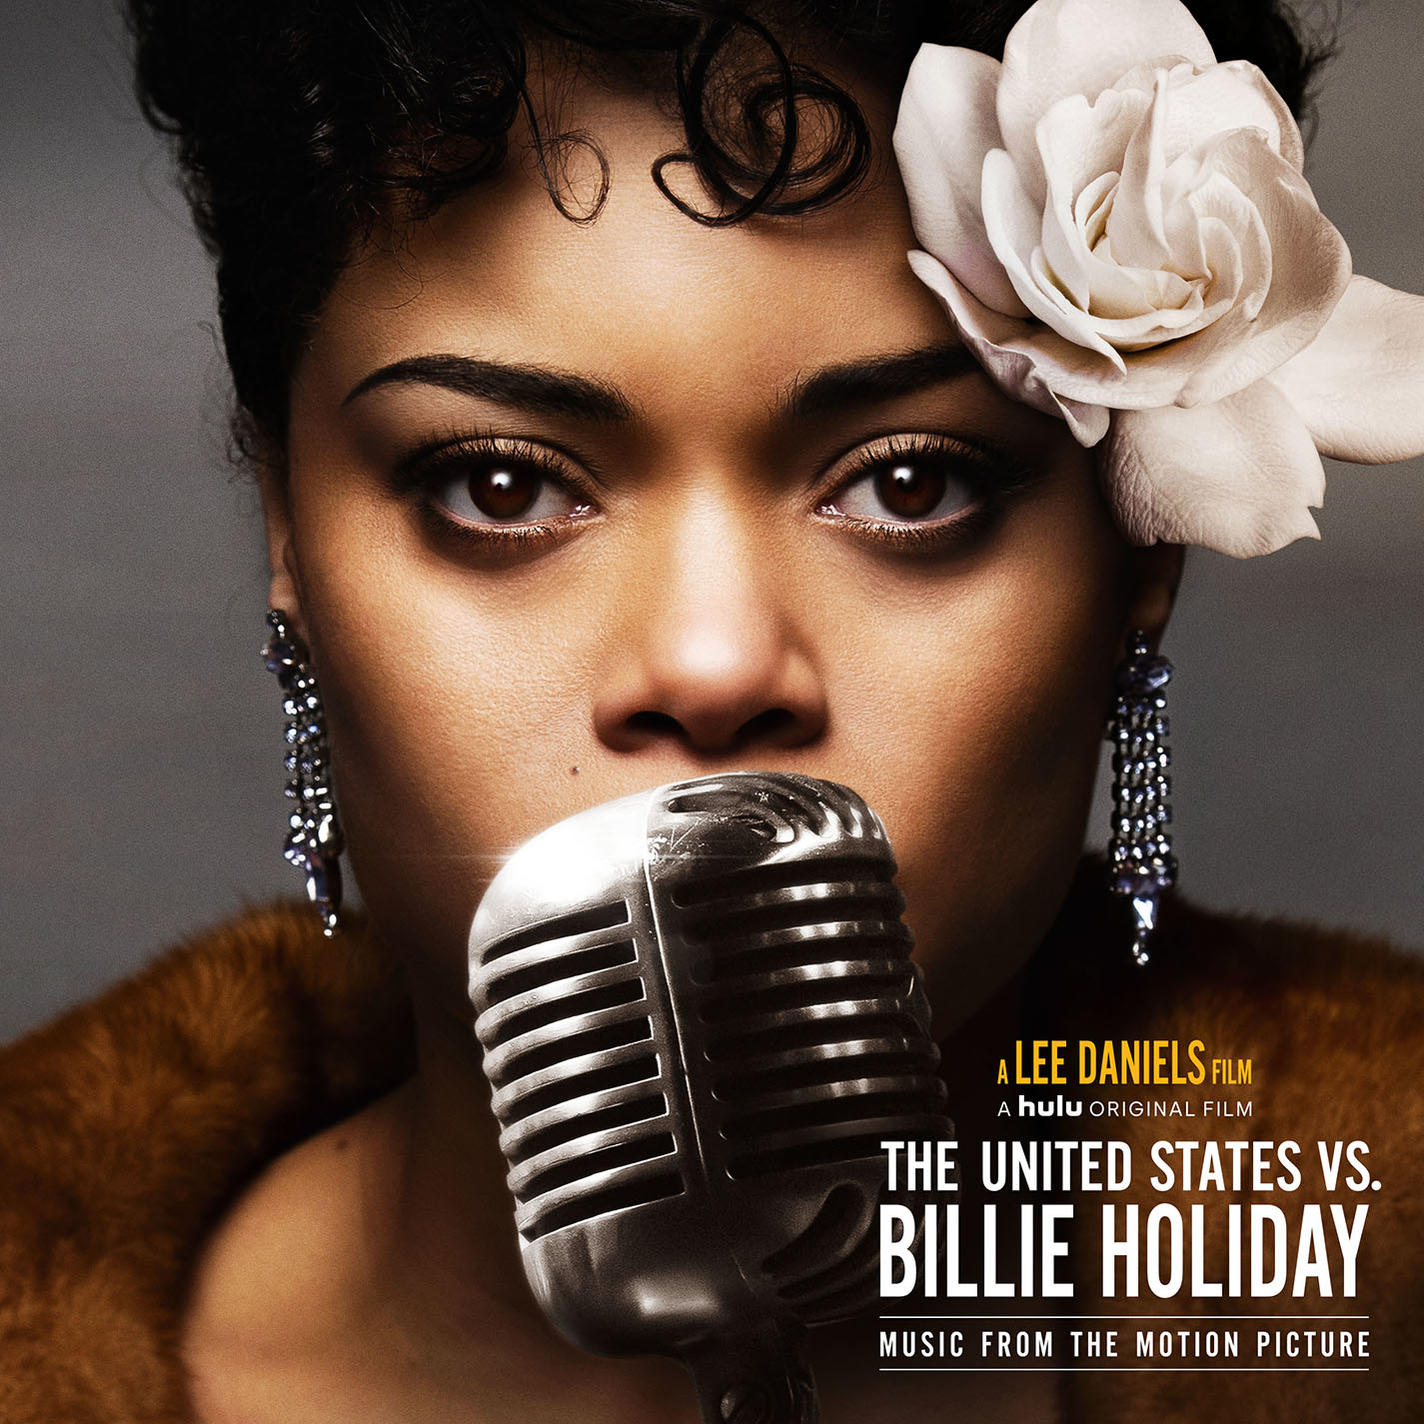 Gold) vs. Andra Edition Holiday (Vinyl) United Day Billie - - The (Limited States